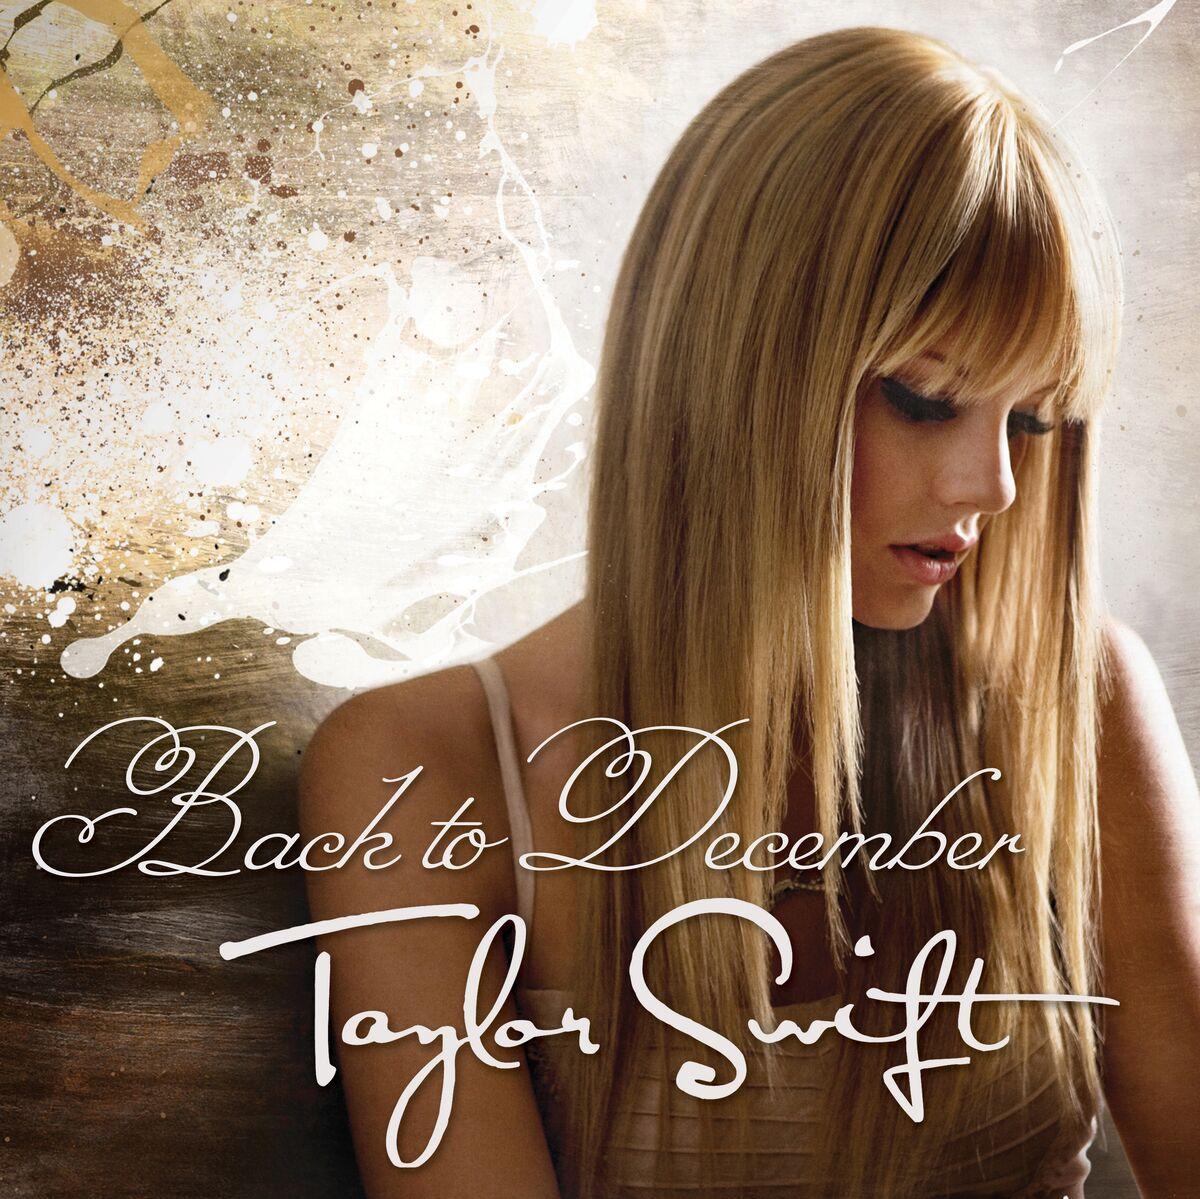 Back To December Taylor Swift